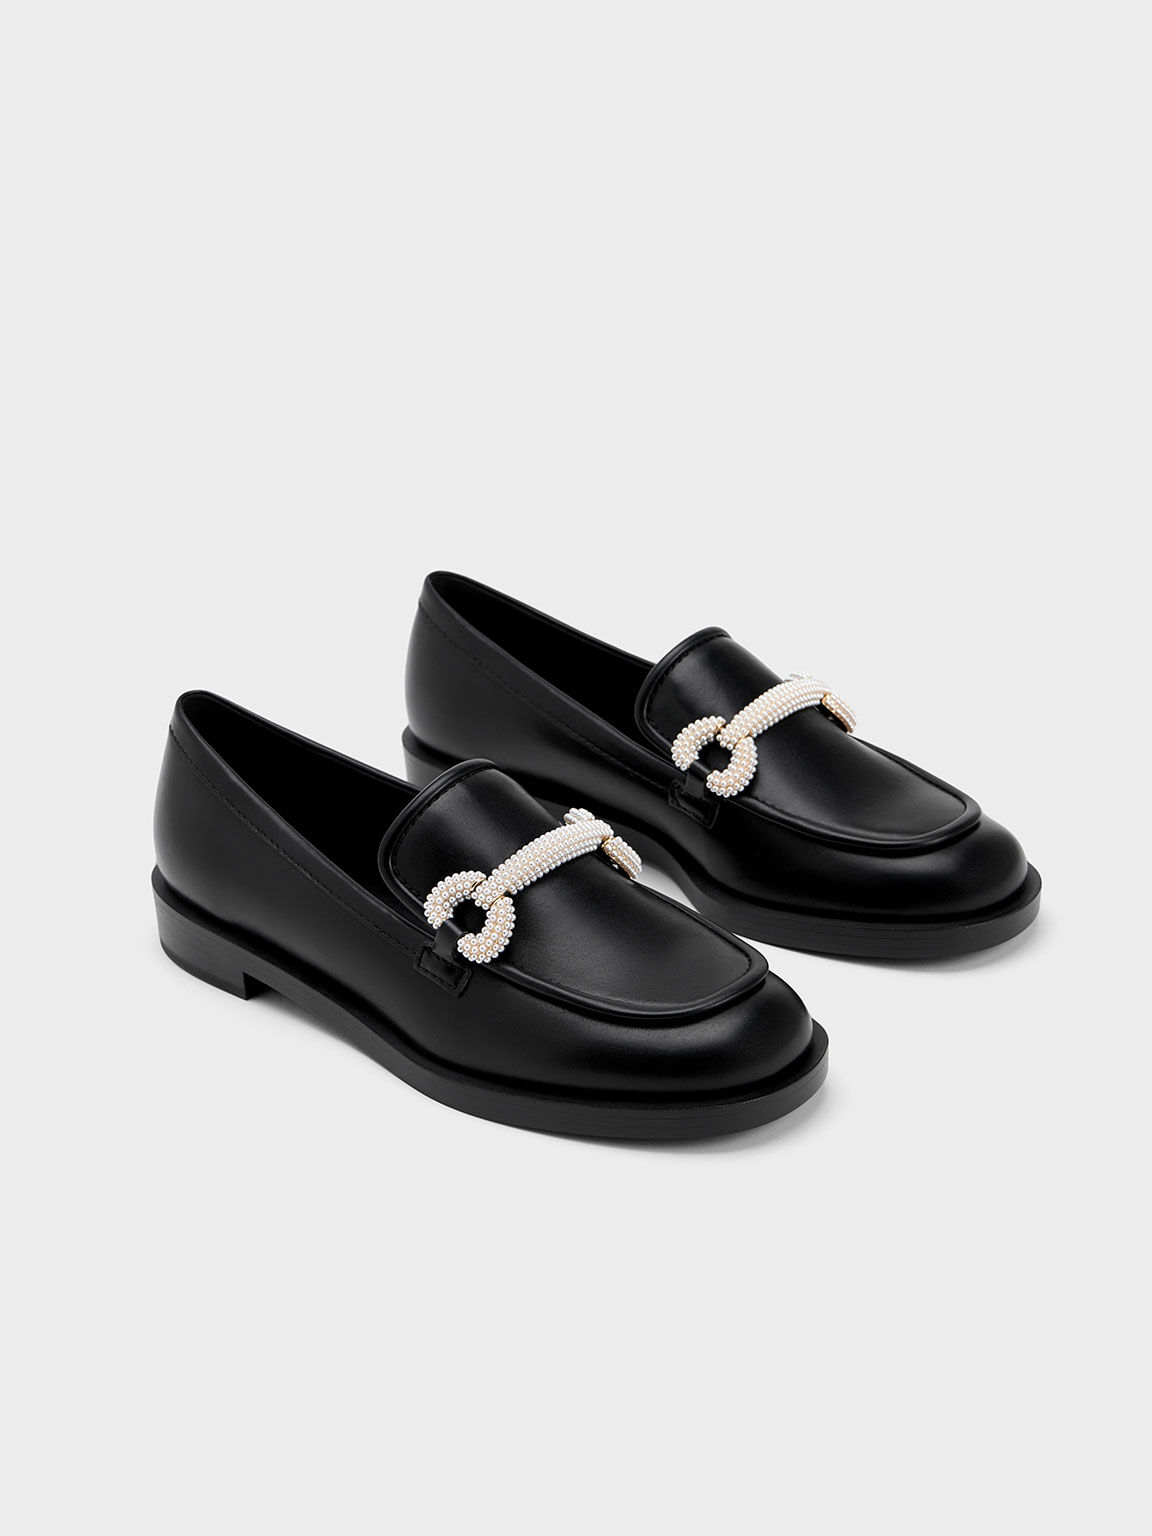 Women's Flats | Shop Exclusives Styles | CHARLES & KEITH UK